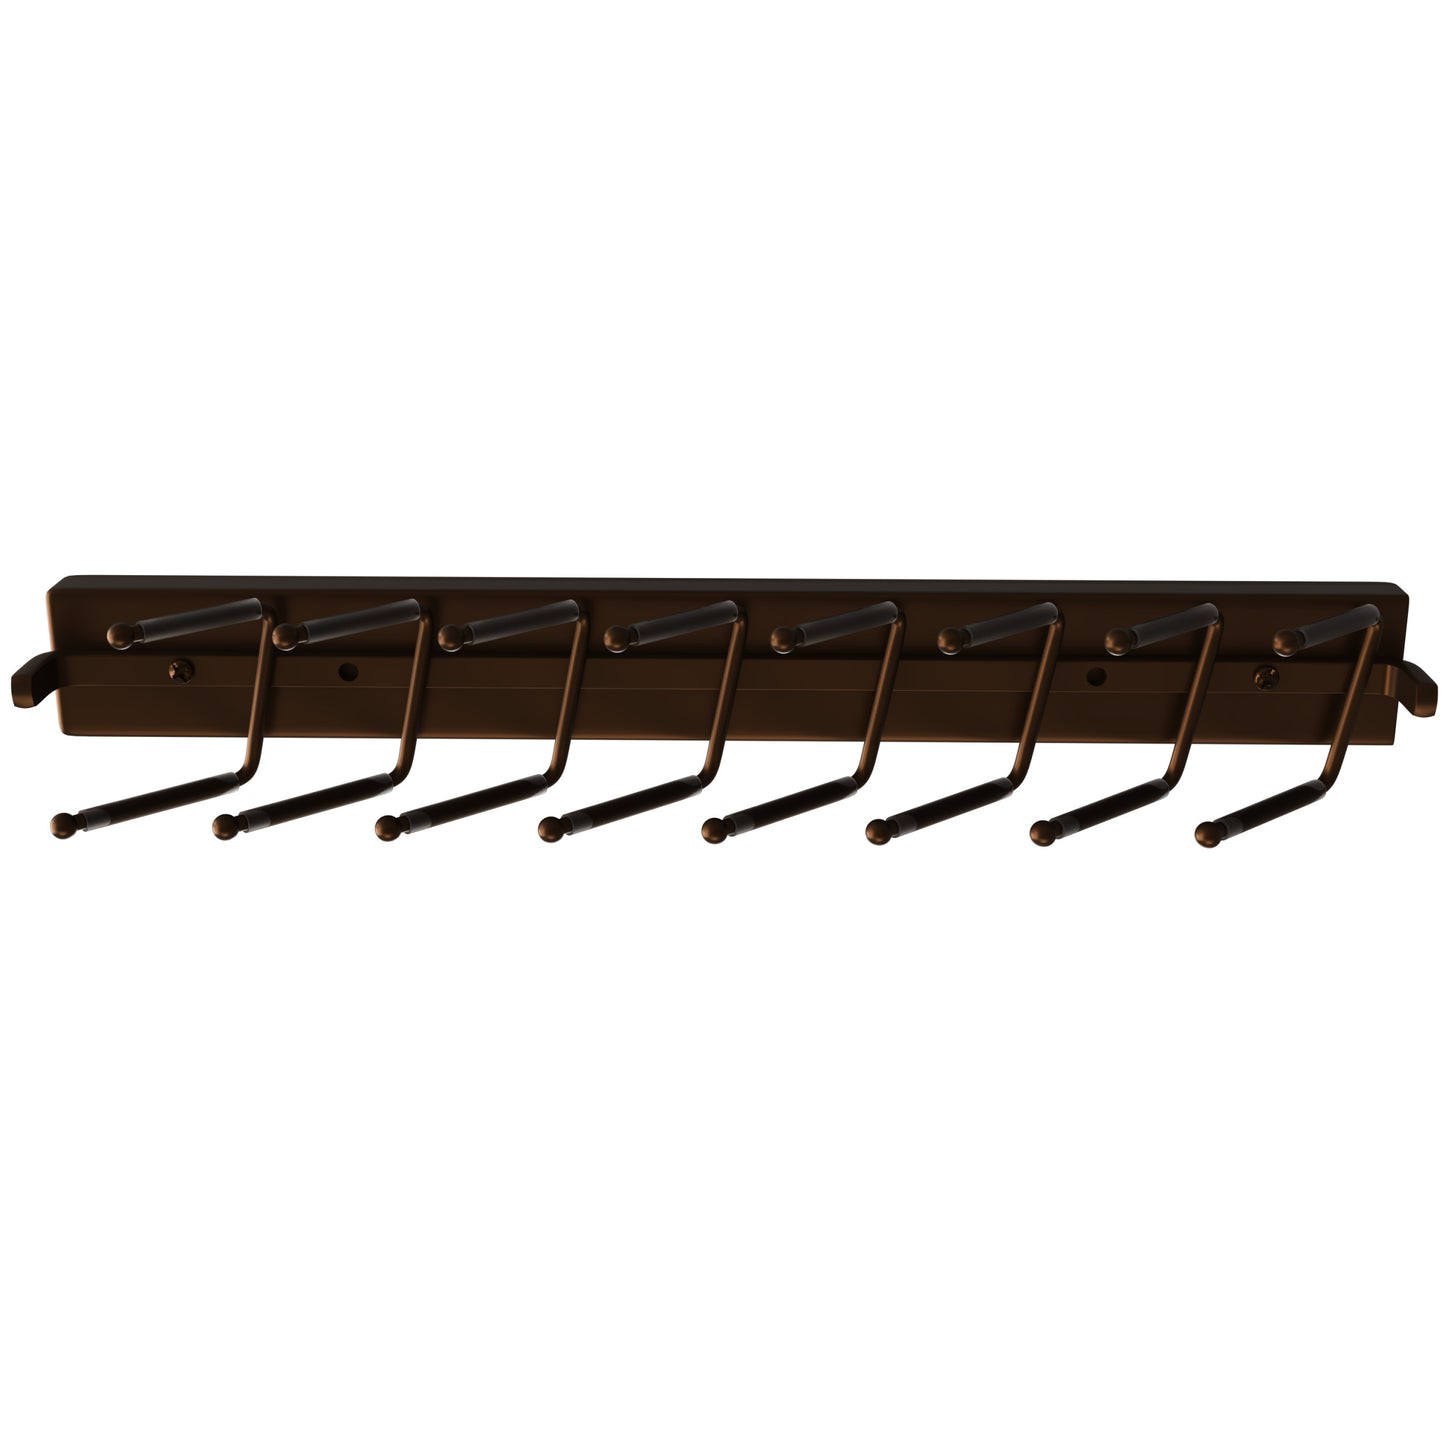 Sidelines / TRCPOSL-14-BZ-1 / Deluxe Pop Out Tie Rack Custom Closet Systems